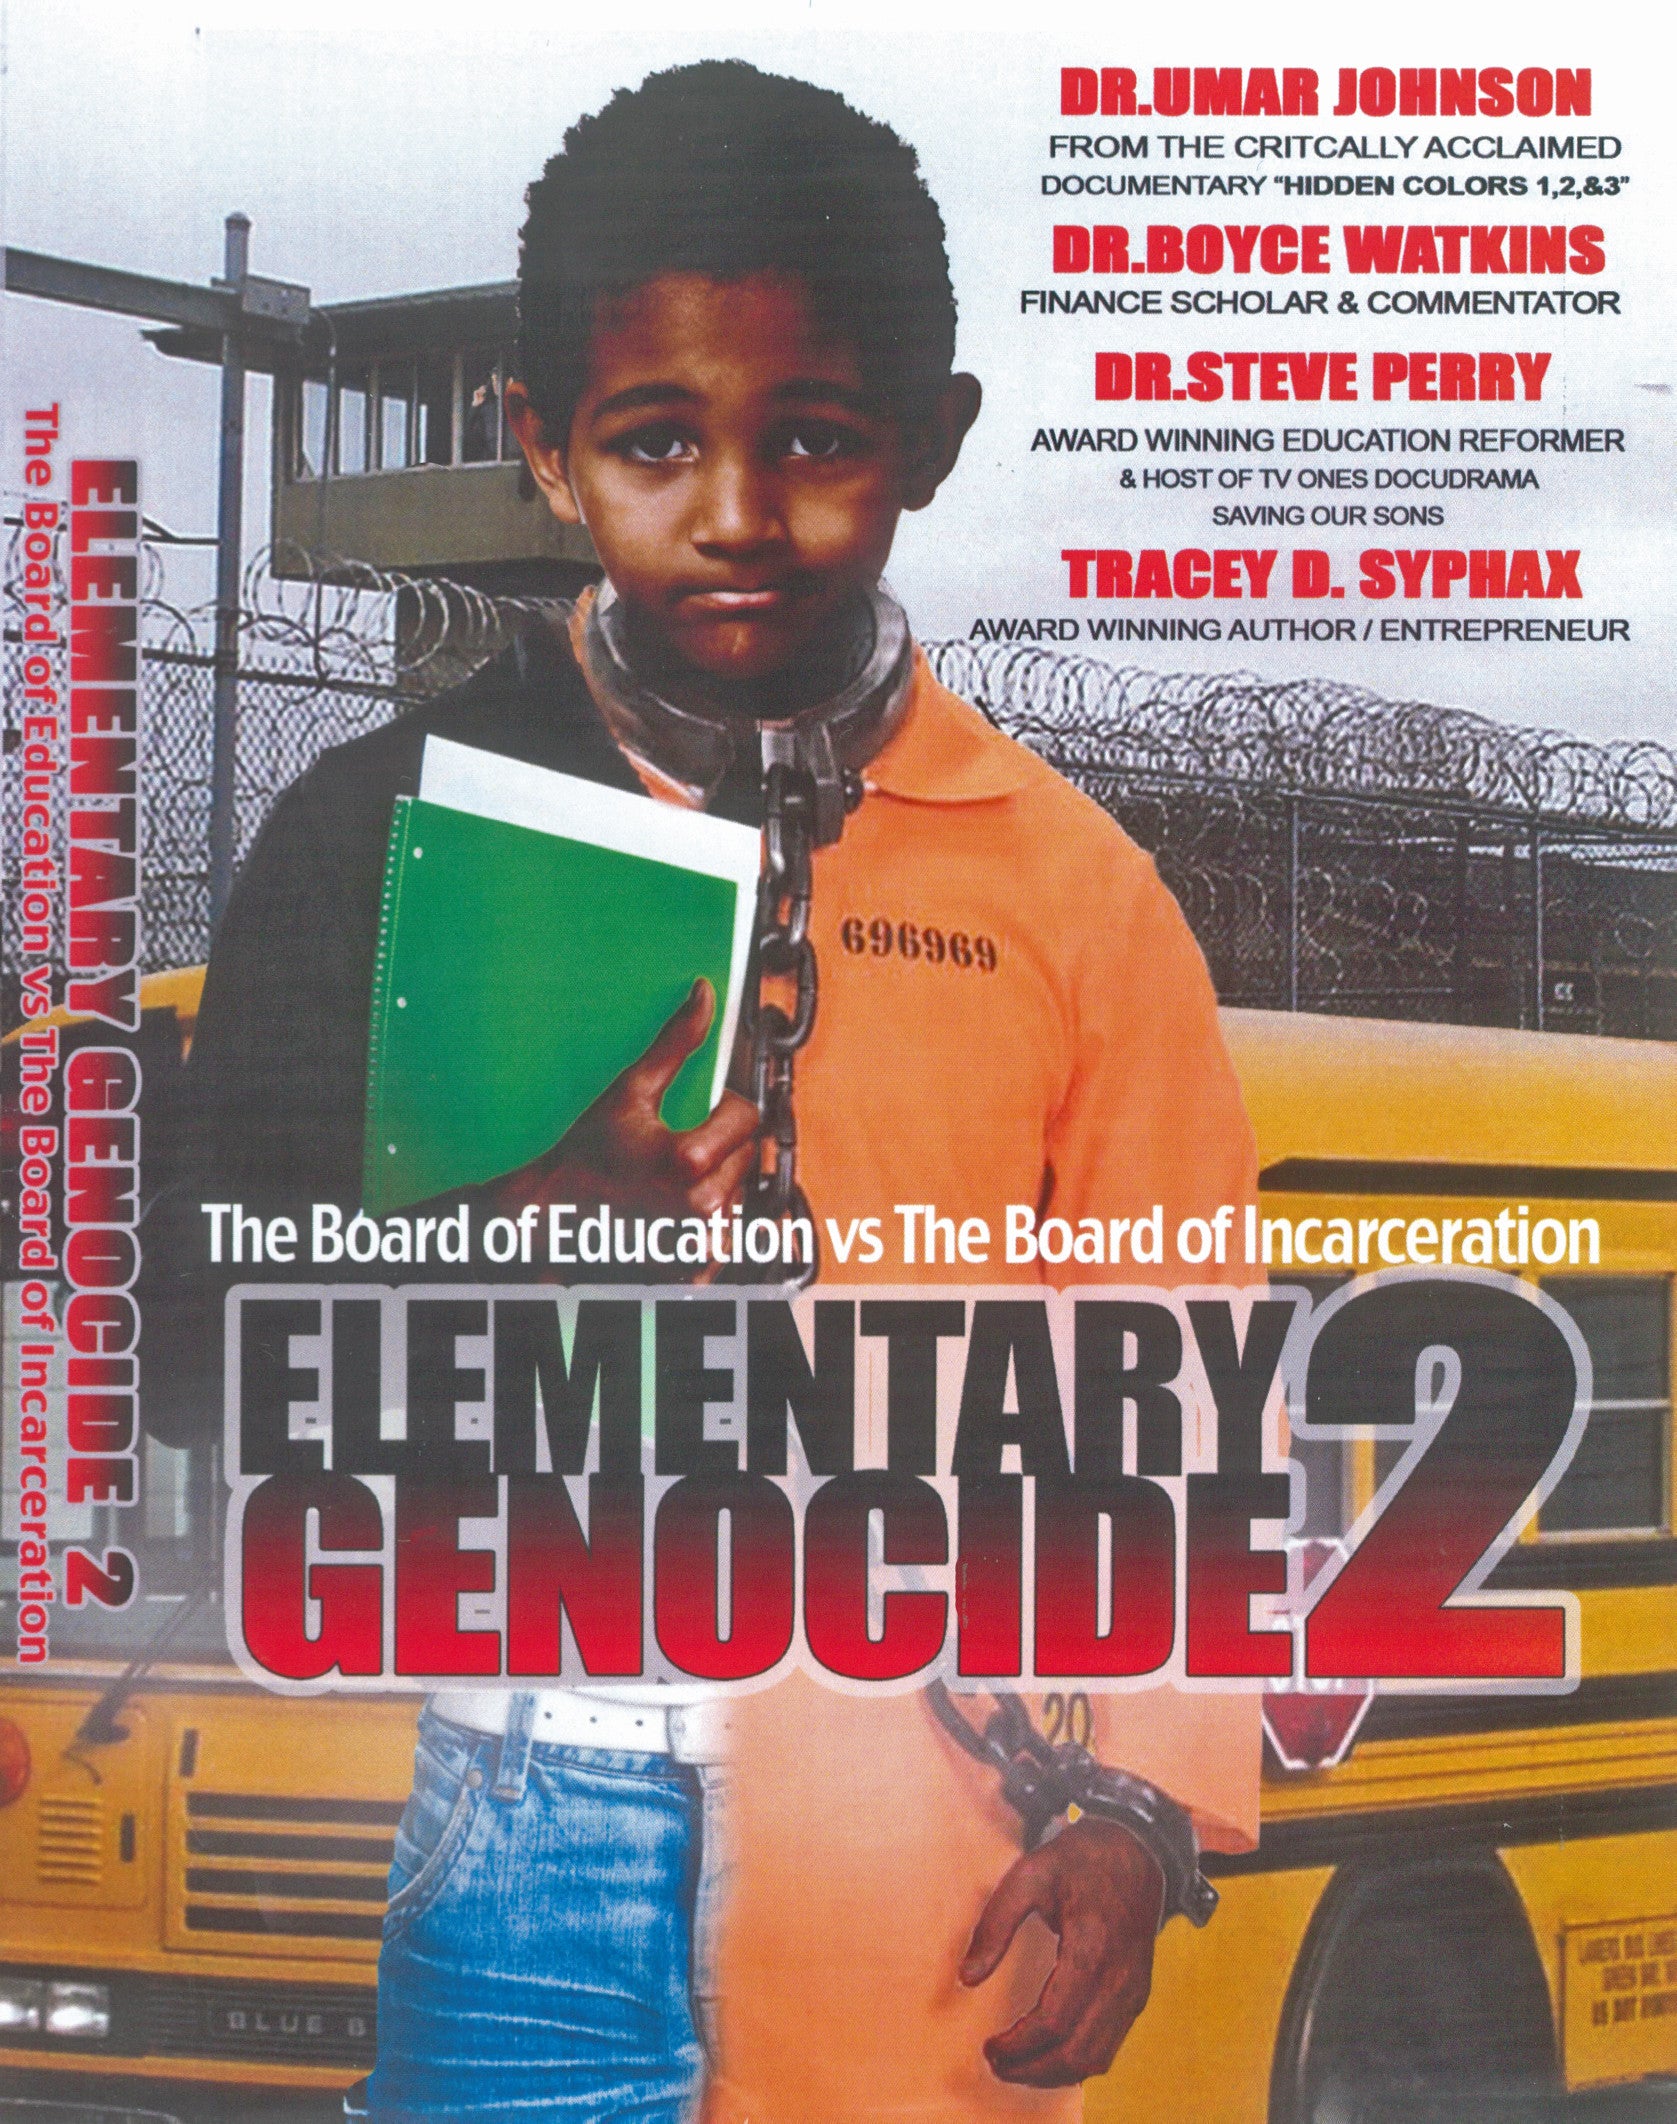 ELEMENTARY GENOCIDE - Part. 2